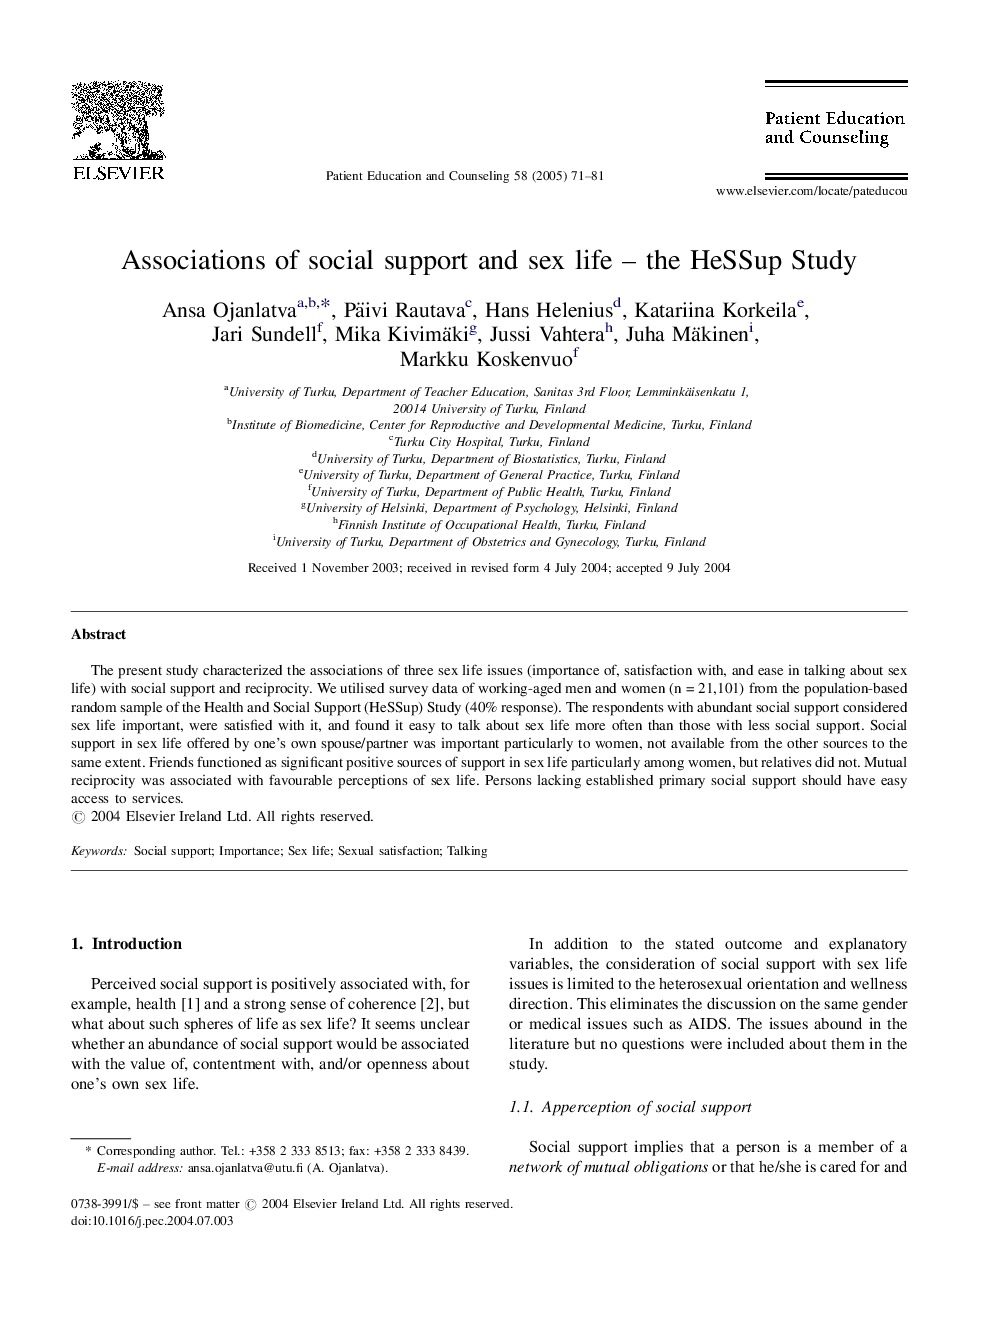 Associations of social support and sex life - the HeSSup Study